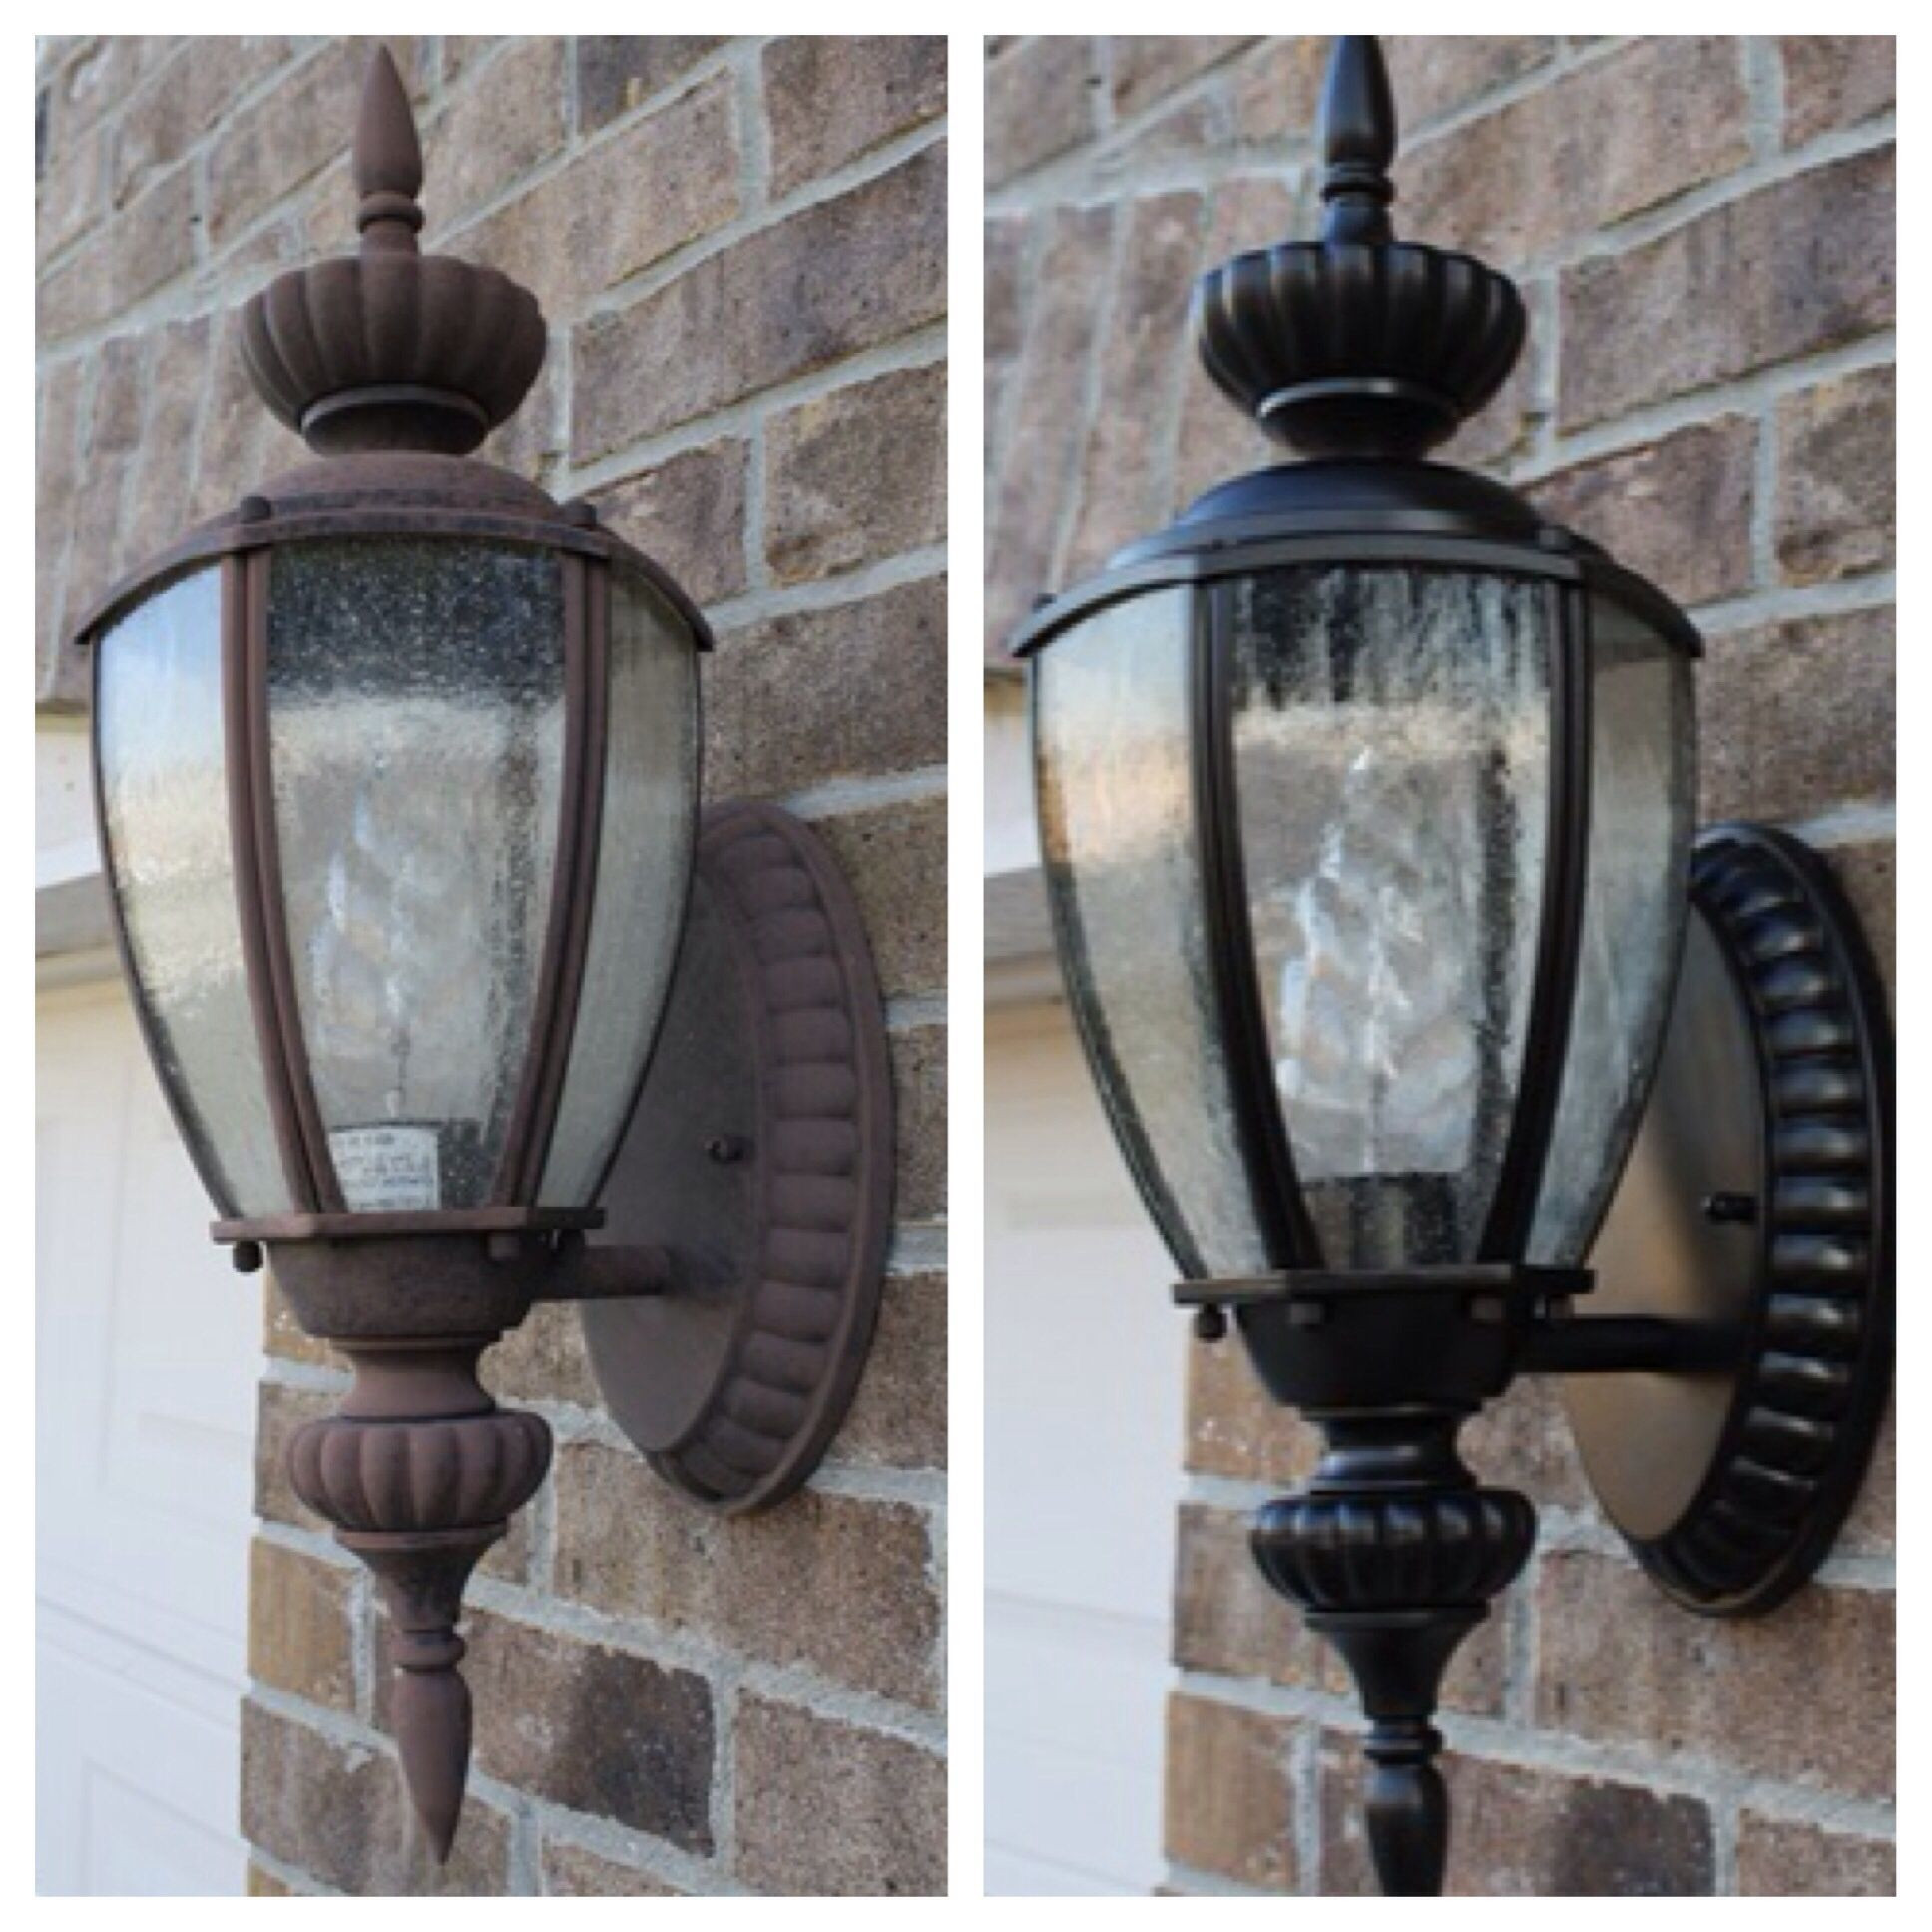 DIY Outdoor Lighting Fixtures
 Making the old look new again with spray paint